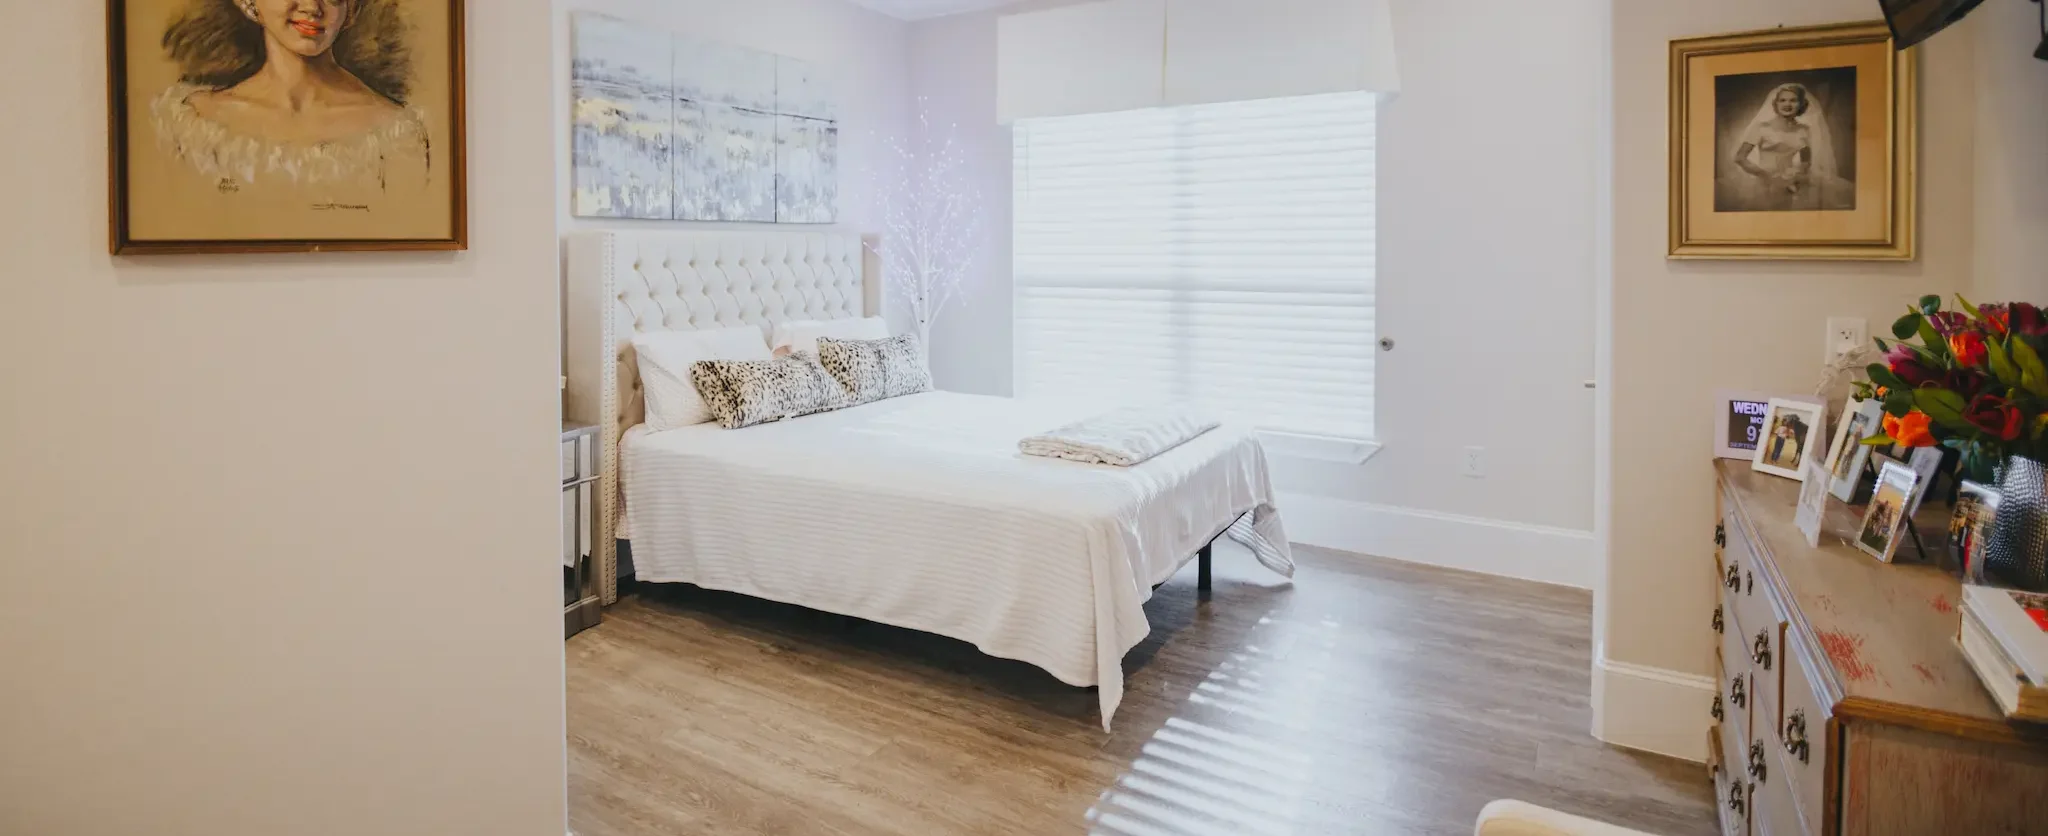 A spacious bedroom at Avalon Memory Care with white furnishings and personalized decor.